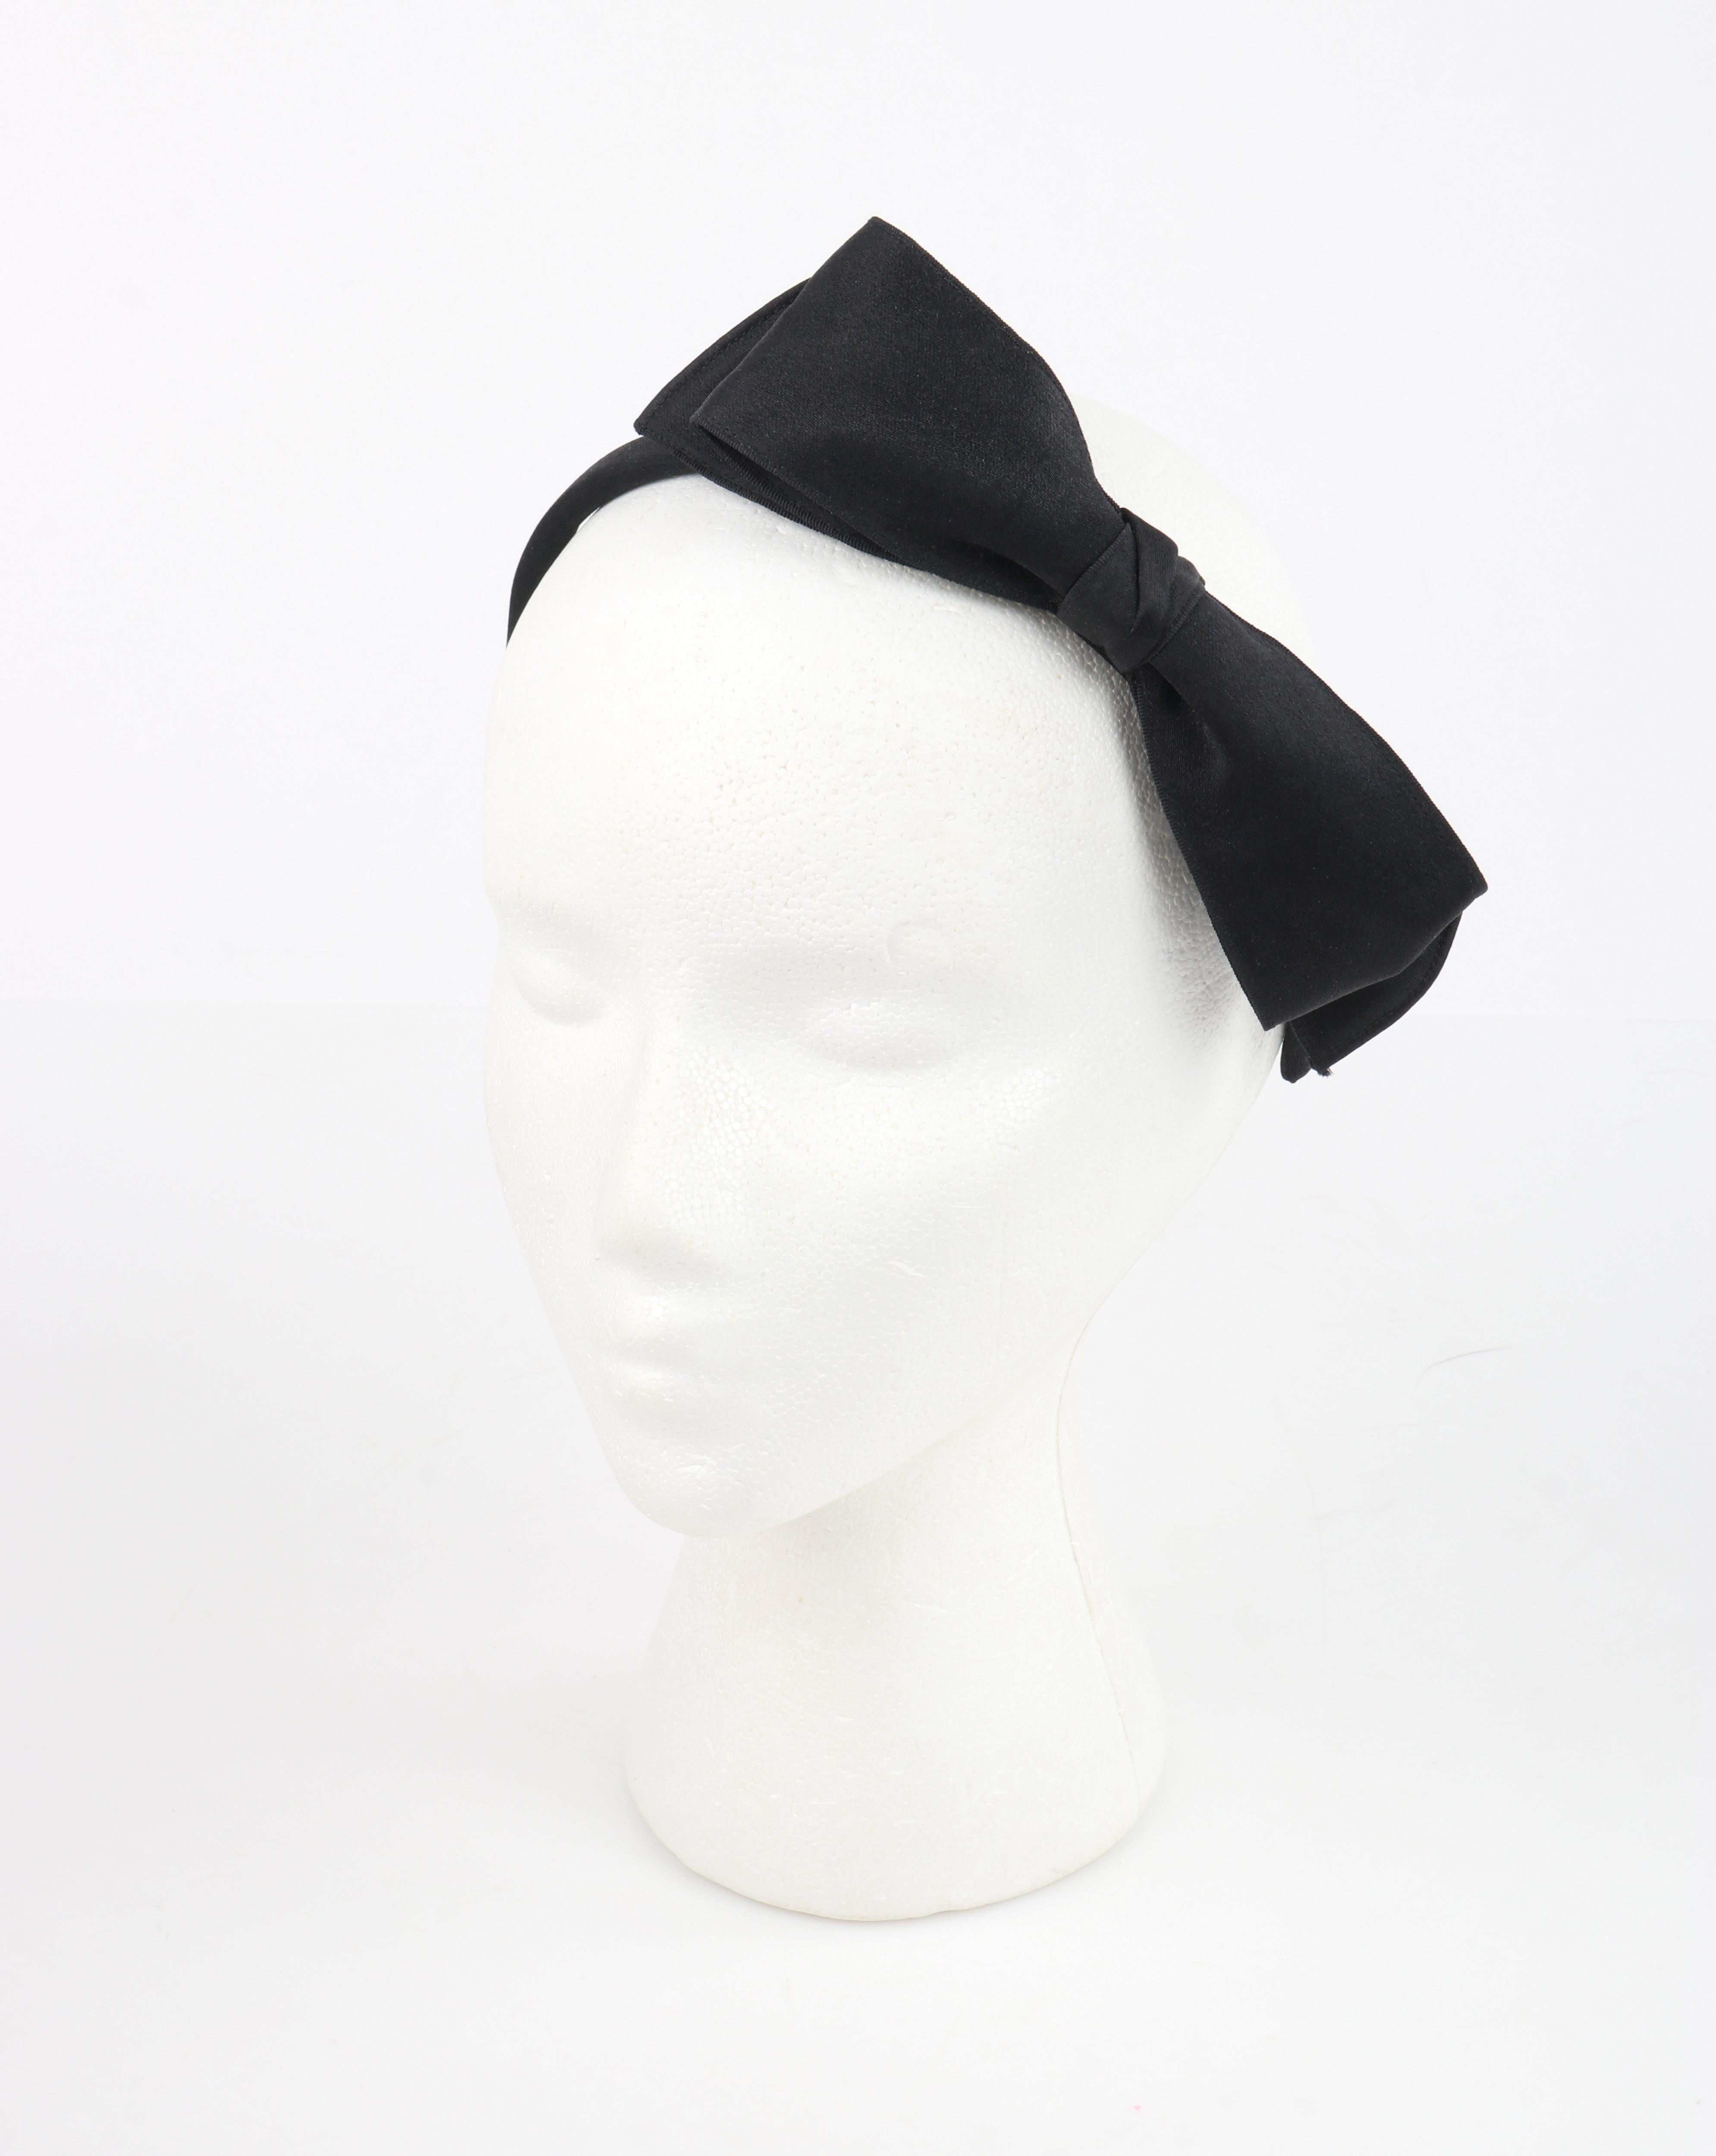 CHANEL F/W 2006 Black Satin Large Asymmetrical Classic Bow Headband Headpiece

Brand / Manufacturer: Chanel
Collection: F/W 2006
Designer: Karl Lagerfeld
Style: Headband
Color(s): Black
Lined: No
Unmarked Fabric (feel of): Satin
Additional Details /